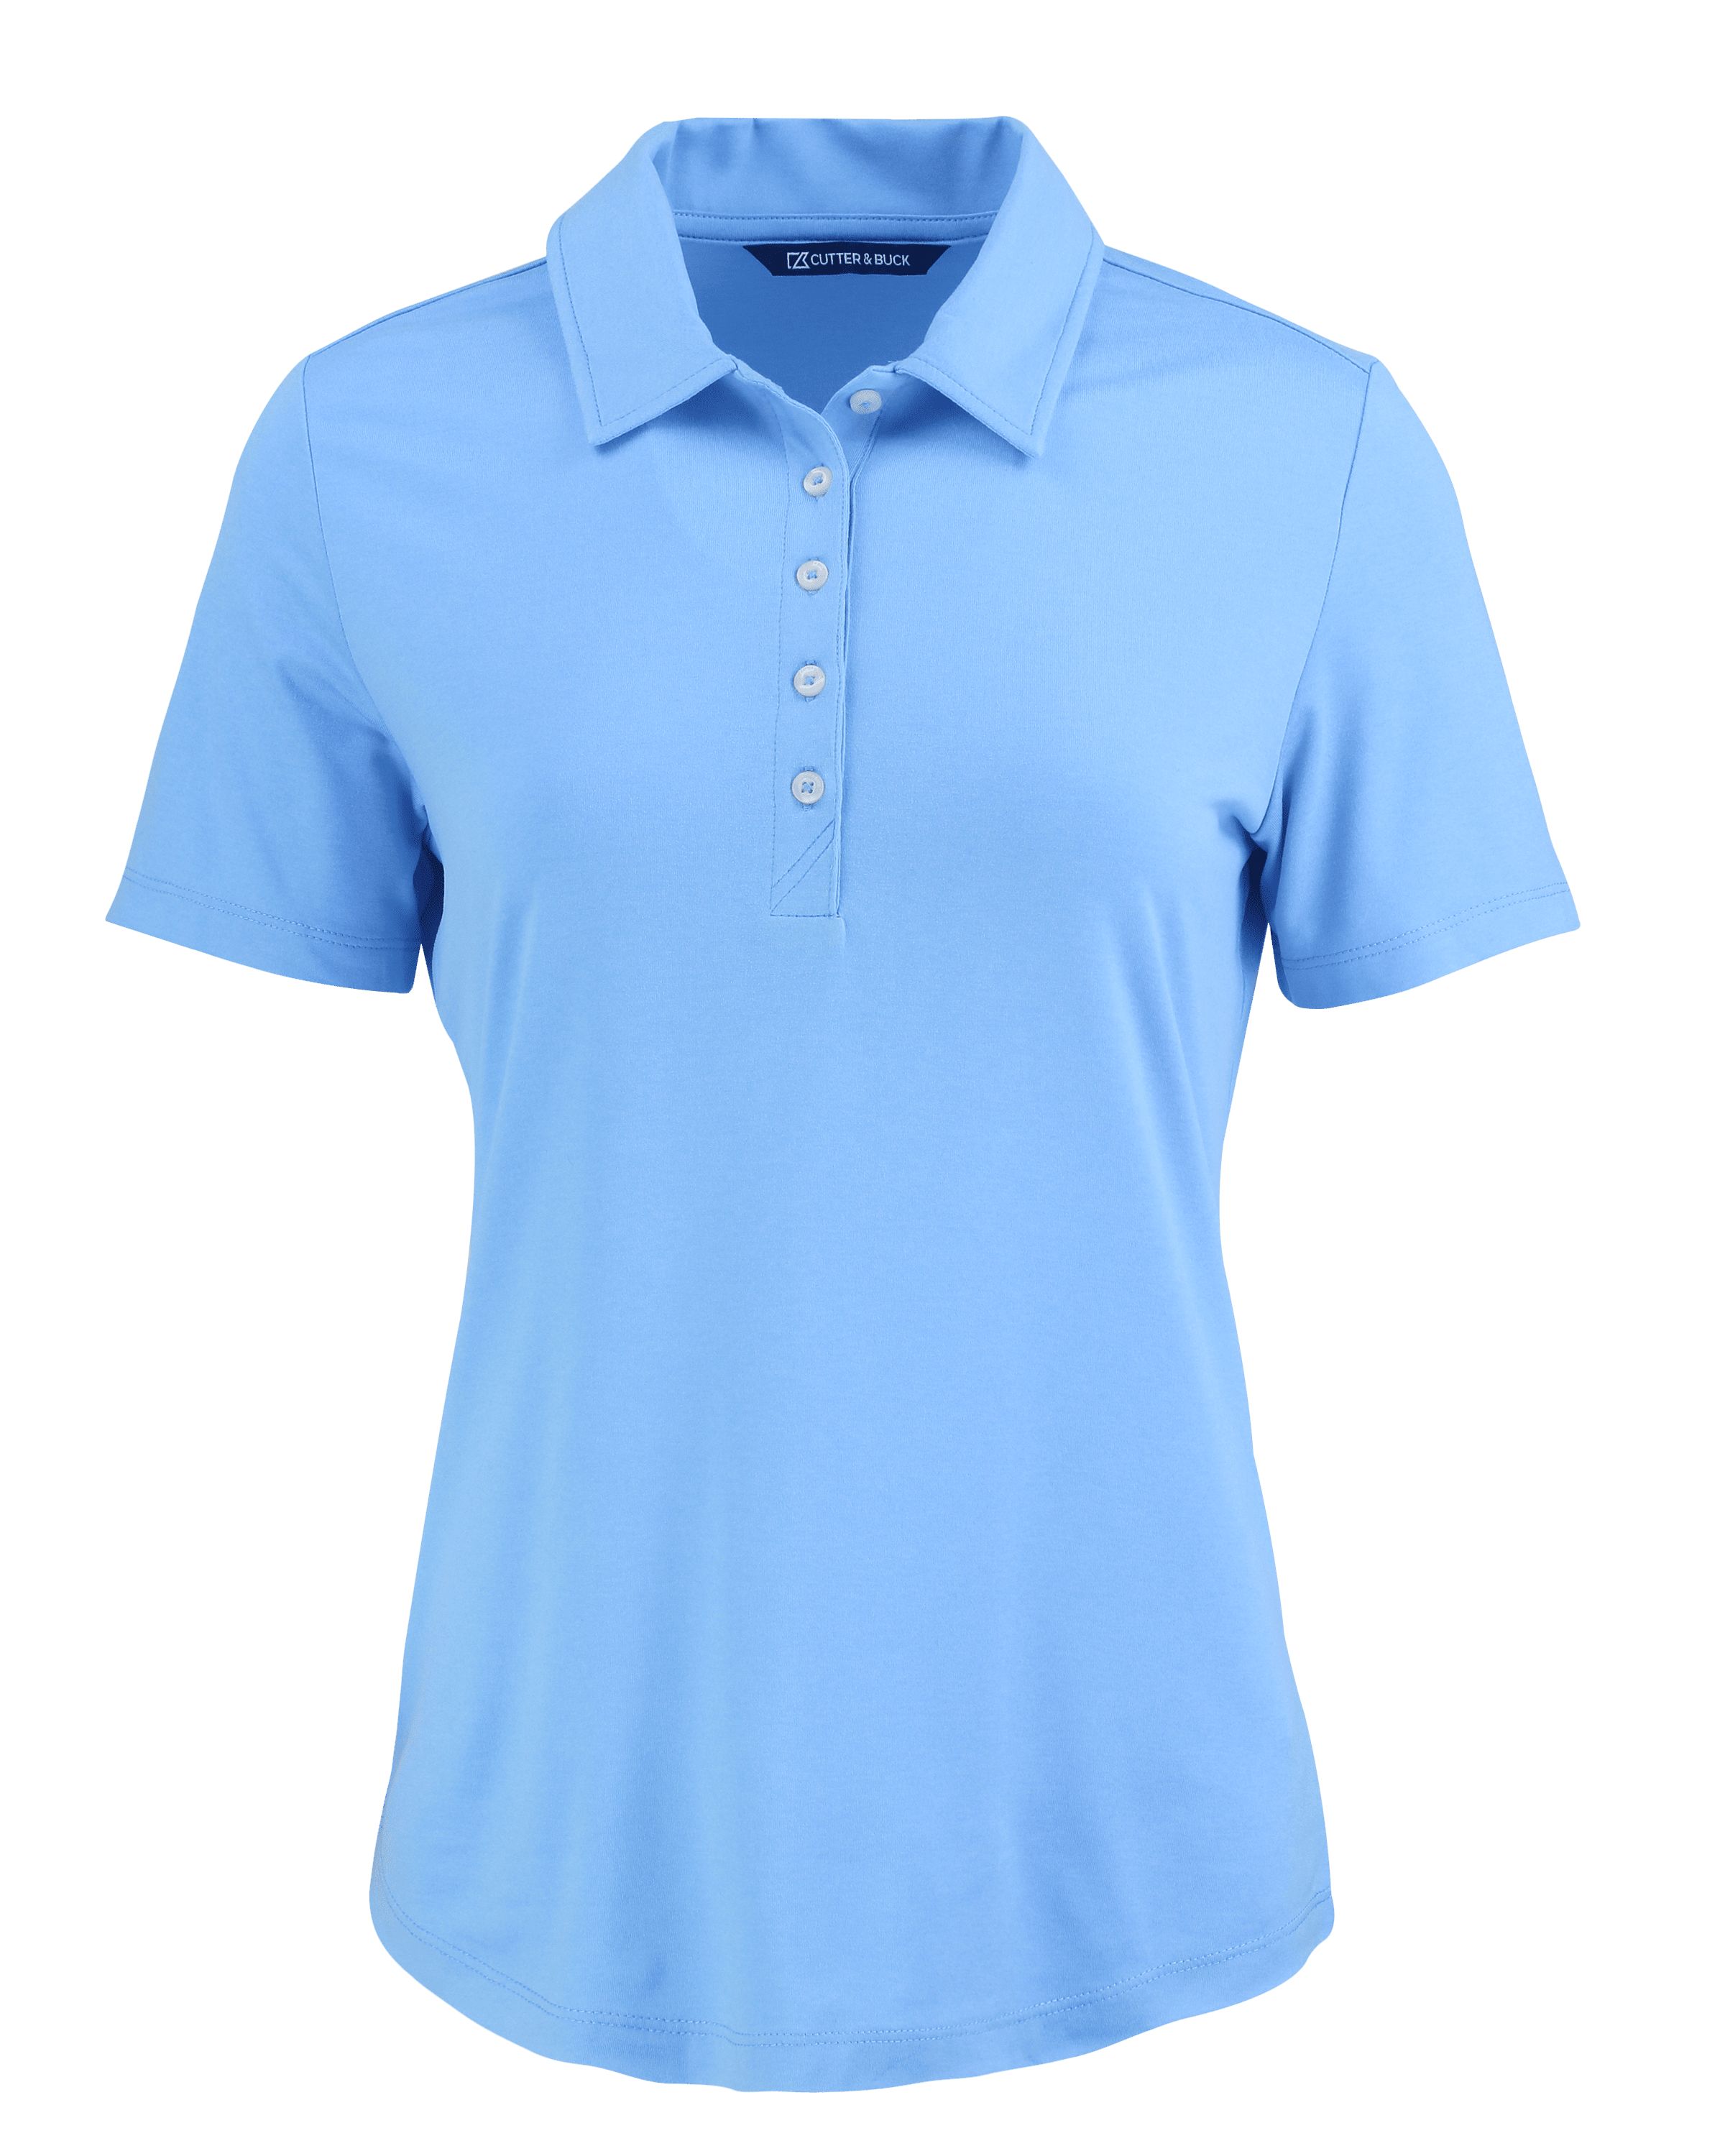 CUTTER & BUCK LCK00192 - Women's Coastline Epic Comfort Eco Recycled Polo